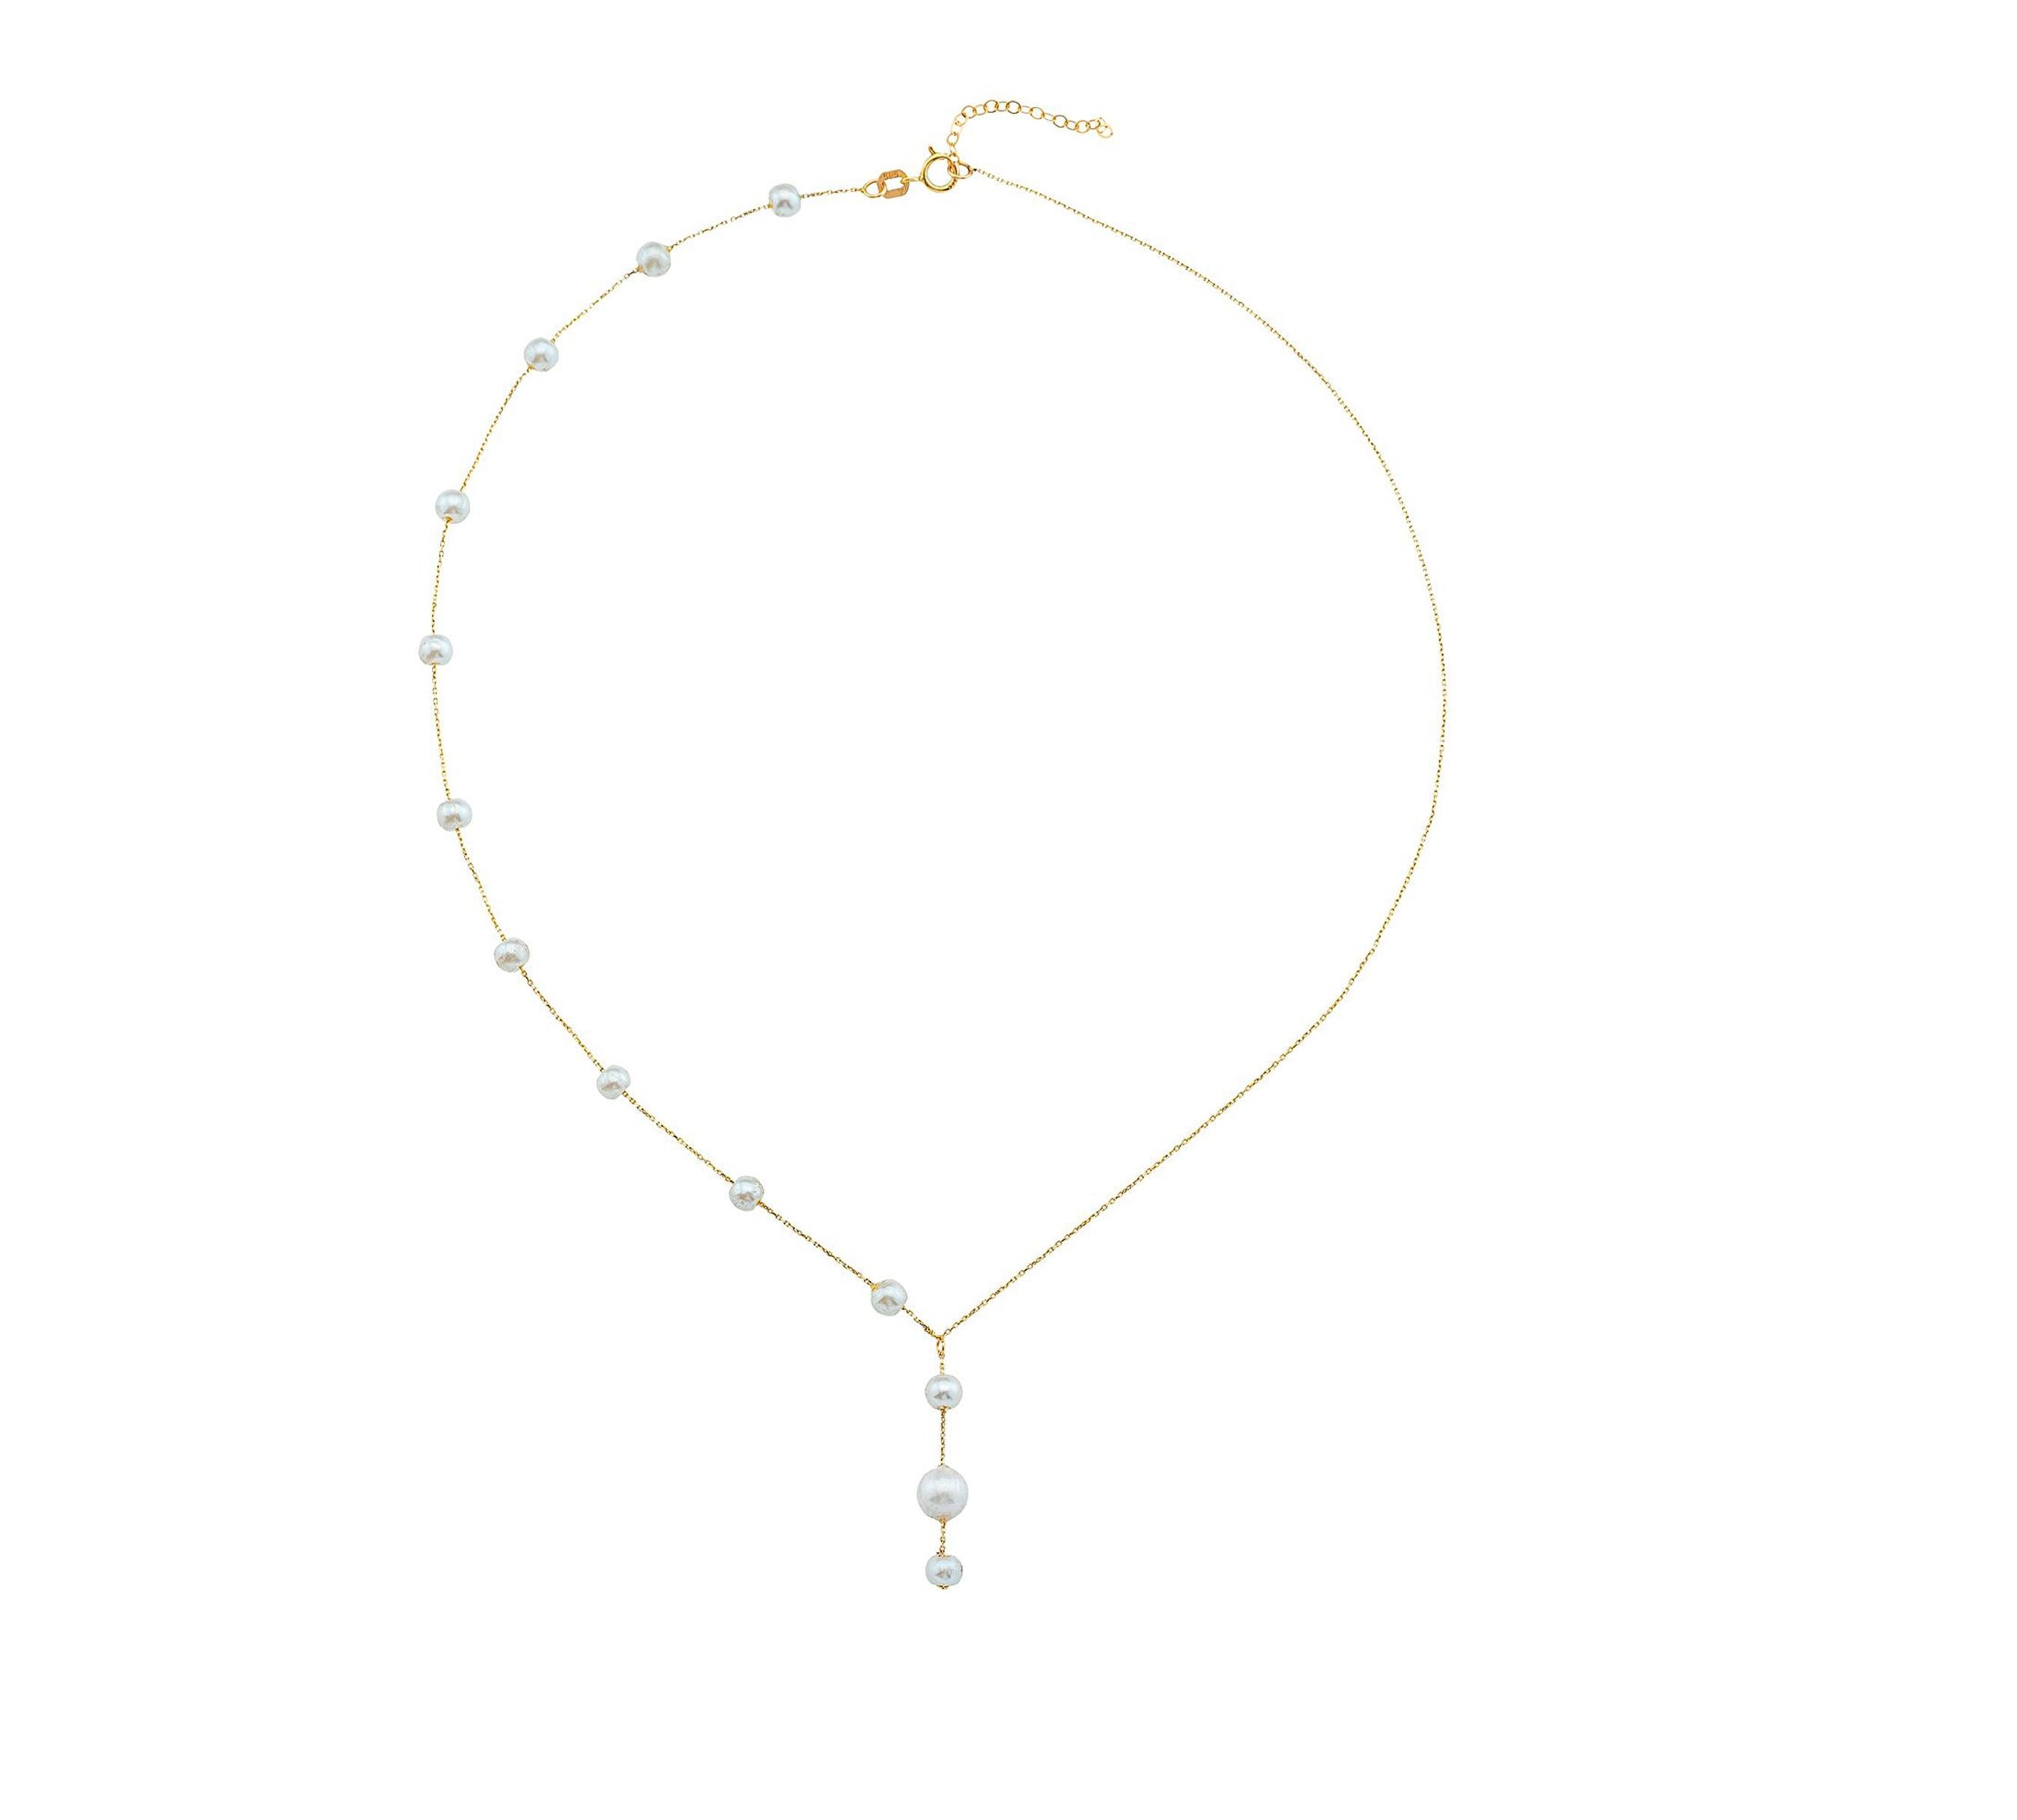  Freshwater pearls in 14 karat gold chain necklace. Pearl necklace. Pearl station floating necklace. Gold Pearl Necklace. 
Total weight: 2.3 g.
Length:  45 sm
Style: Minimalist
Gemstones:
 13 pieces - freshwater pearls, white color
This necklace-